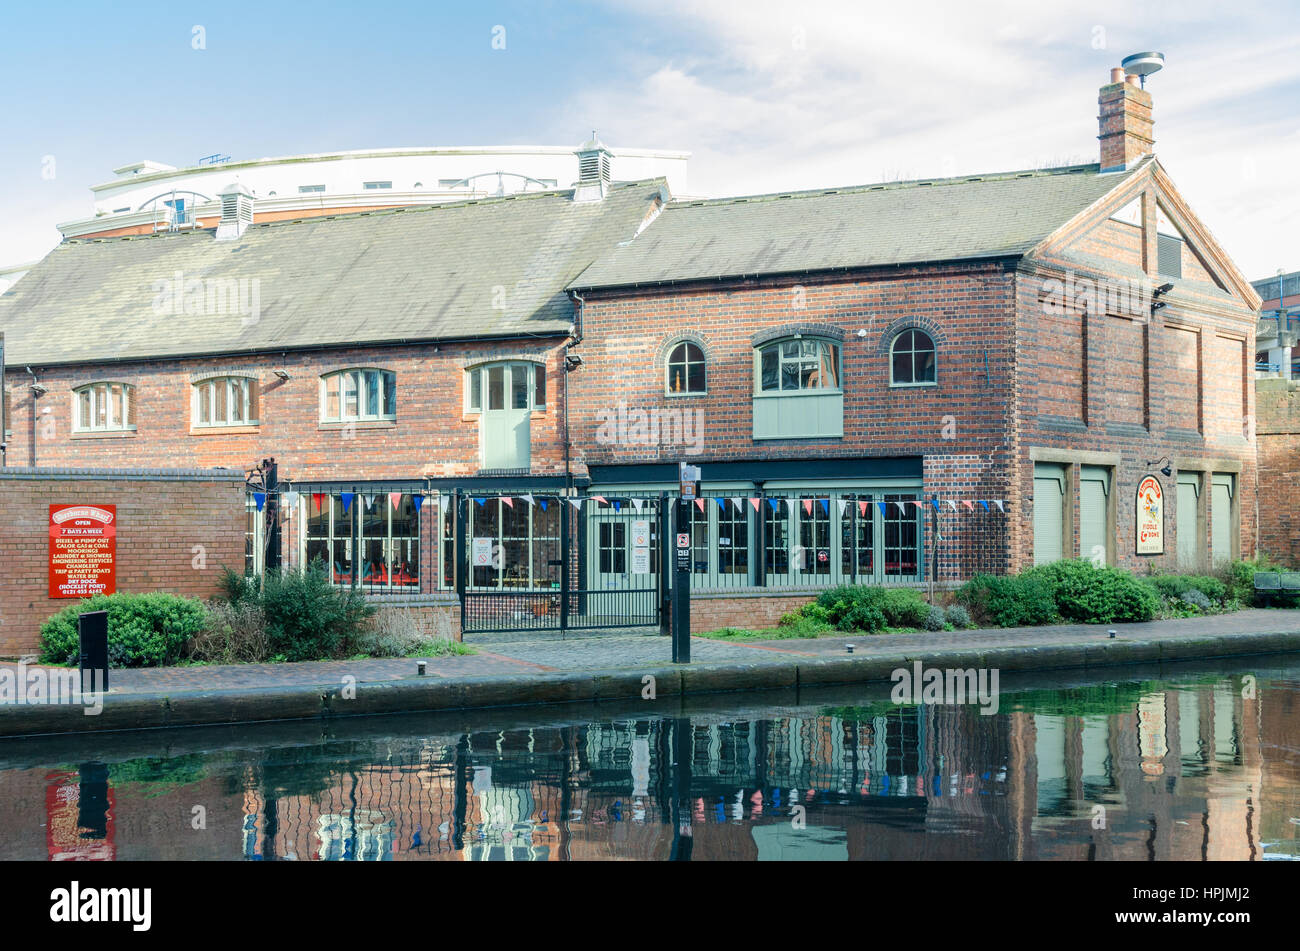 The Fiddle and Bone pub in birmingham viewed from the canal Stock Photo